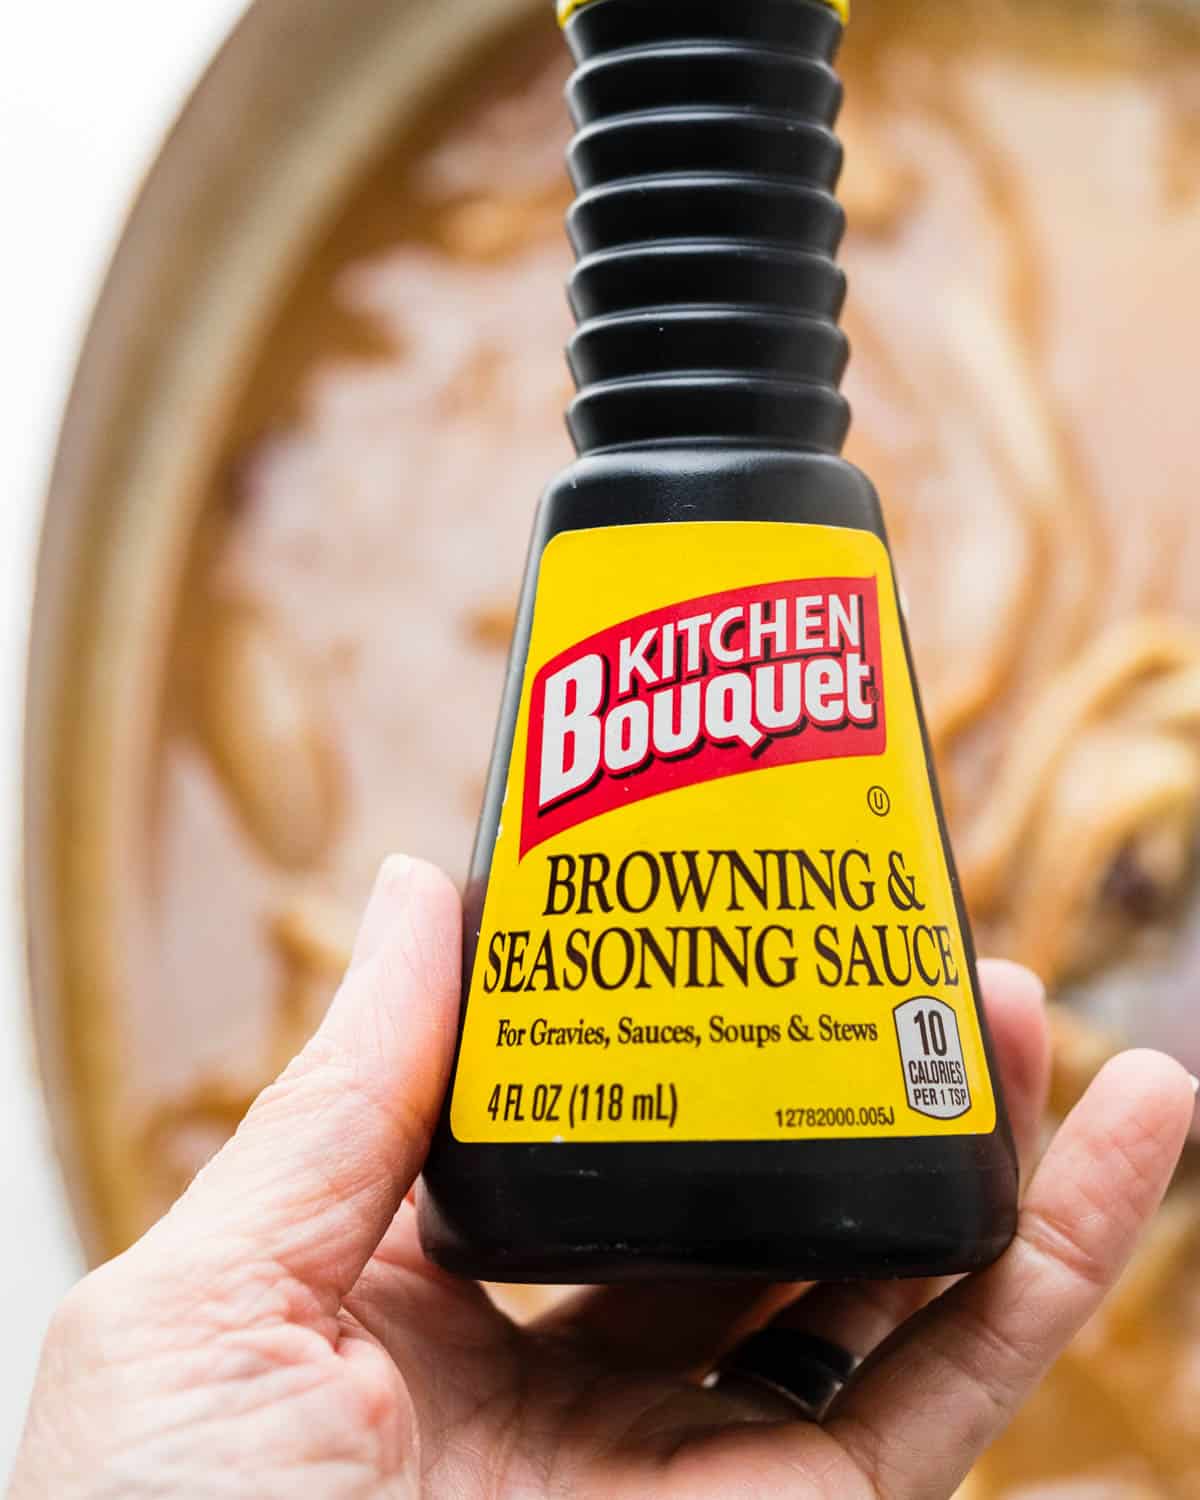 Kitchen Bouquet browning and seasoning sauce.